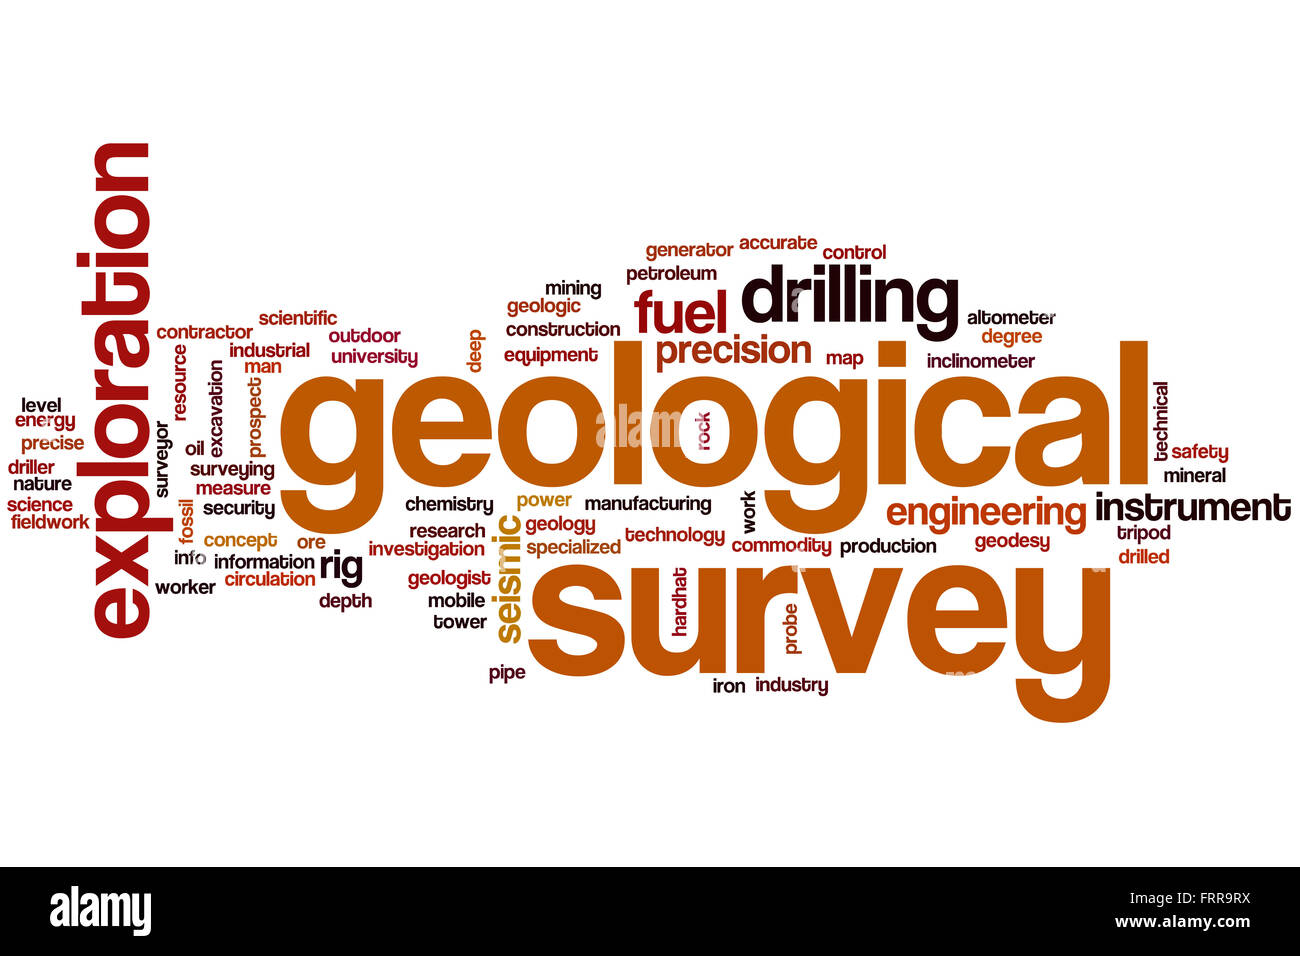 Geological survey word cloud concept Stock Photo